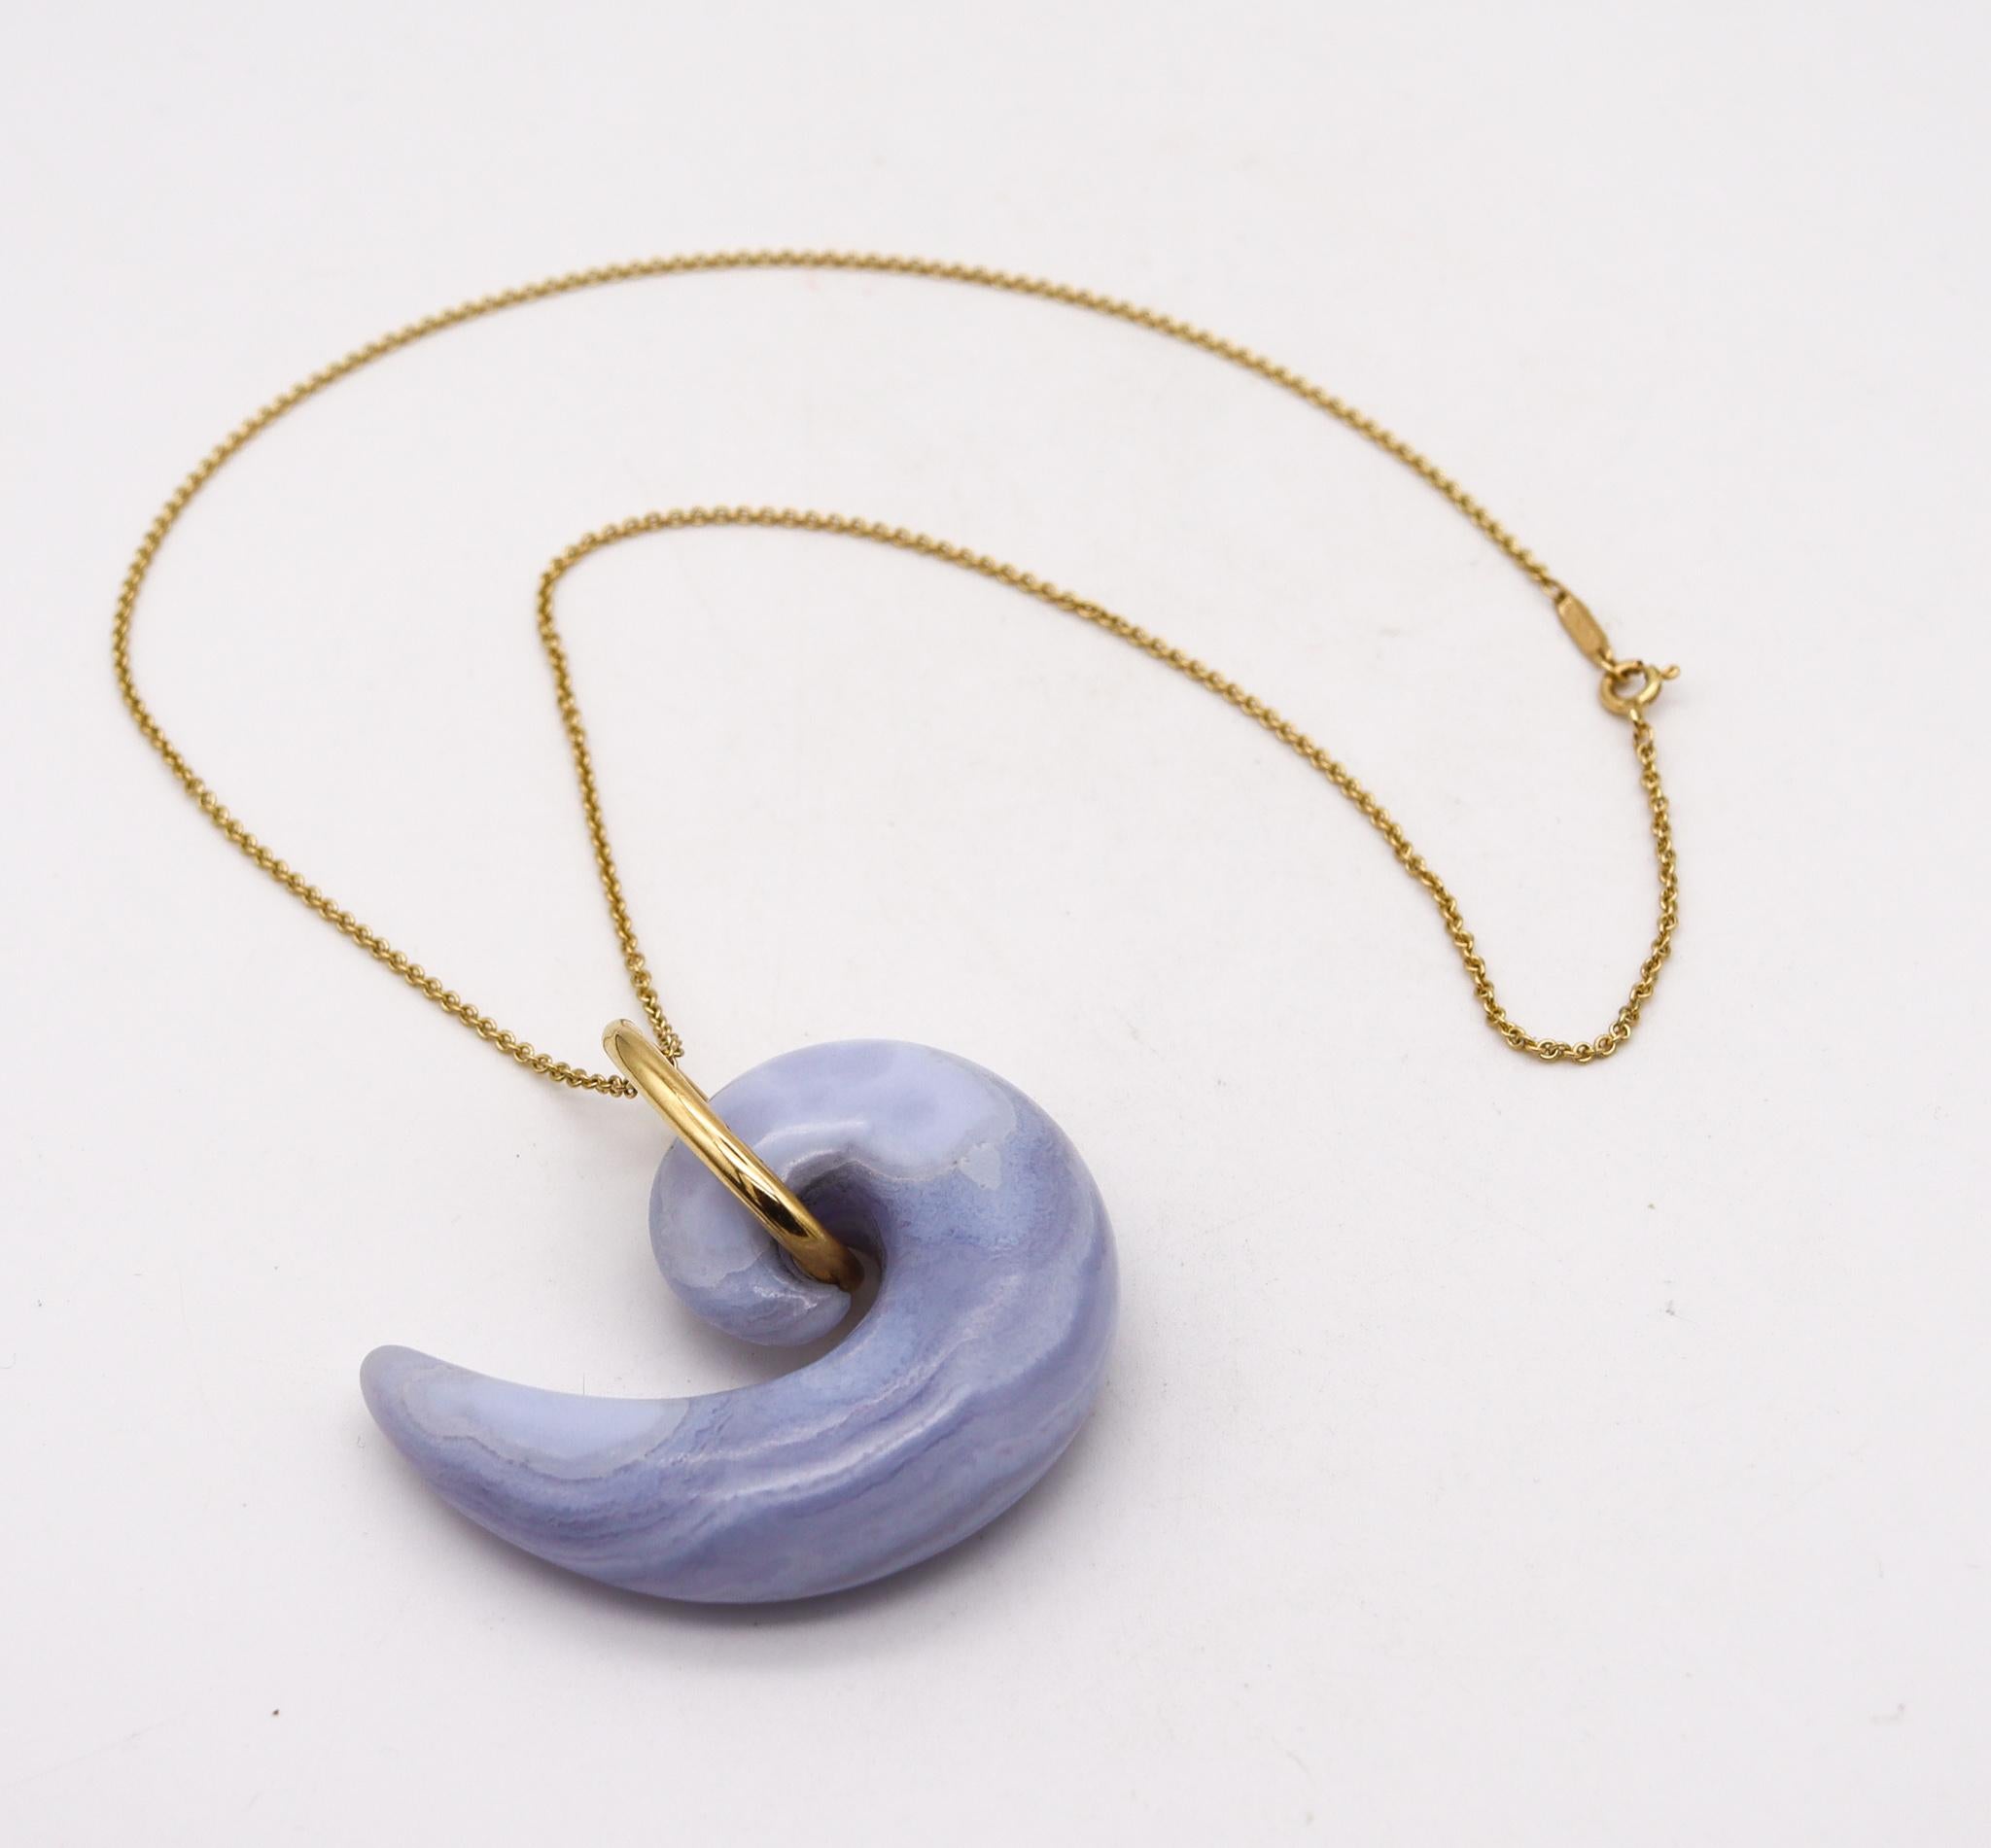 Modernist Tiffany & Co. 1970 Angela Cummings Blue Lace Agate Comma Necklace in 18Kt Gold